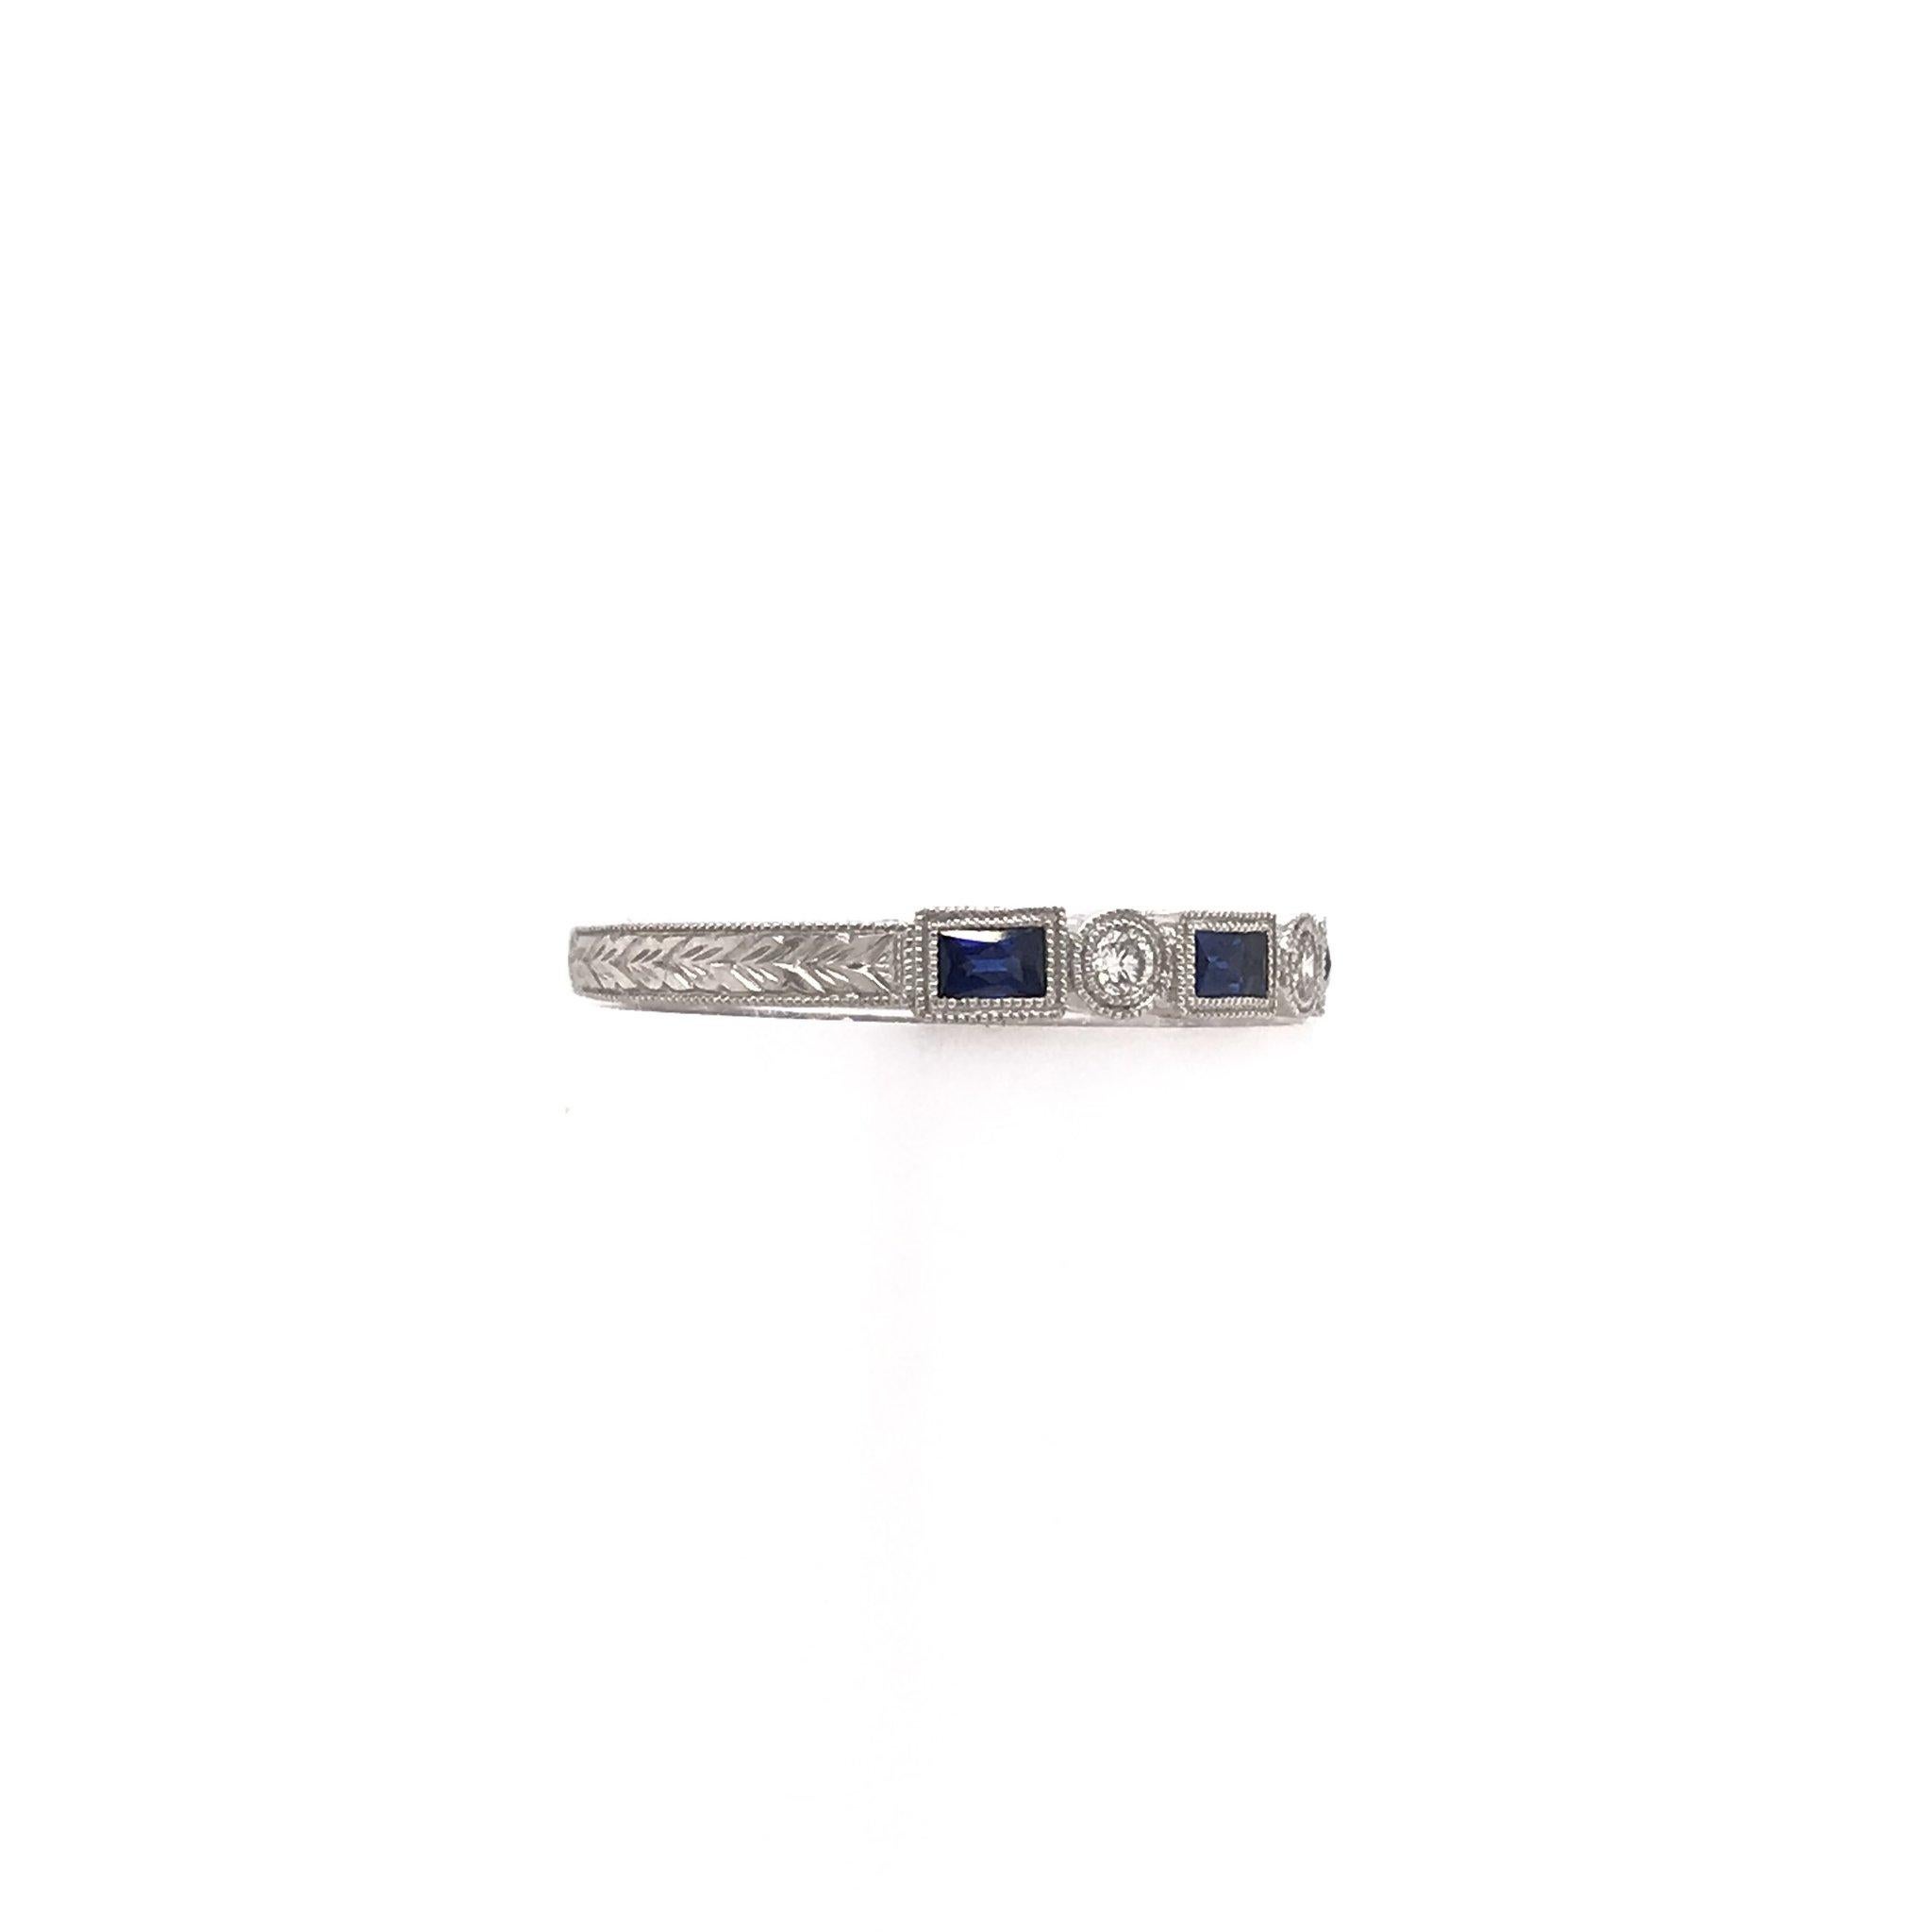 This piece is an extraordinary antique reproduction, meant to emulate the Art Deco design style. This platinum band features three sparkling diamonds accents as well as four french cut deep blue sapphires, extensive hand engravings, and fine